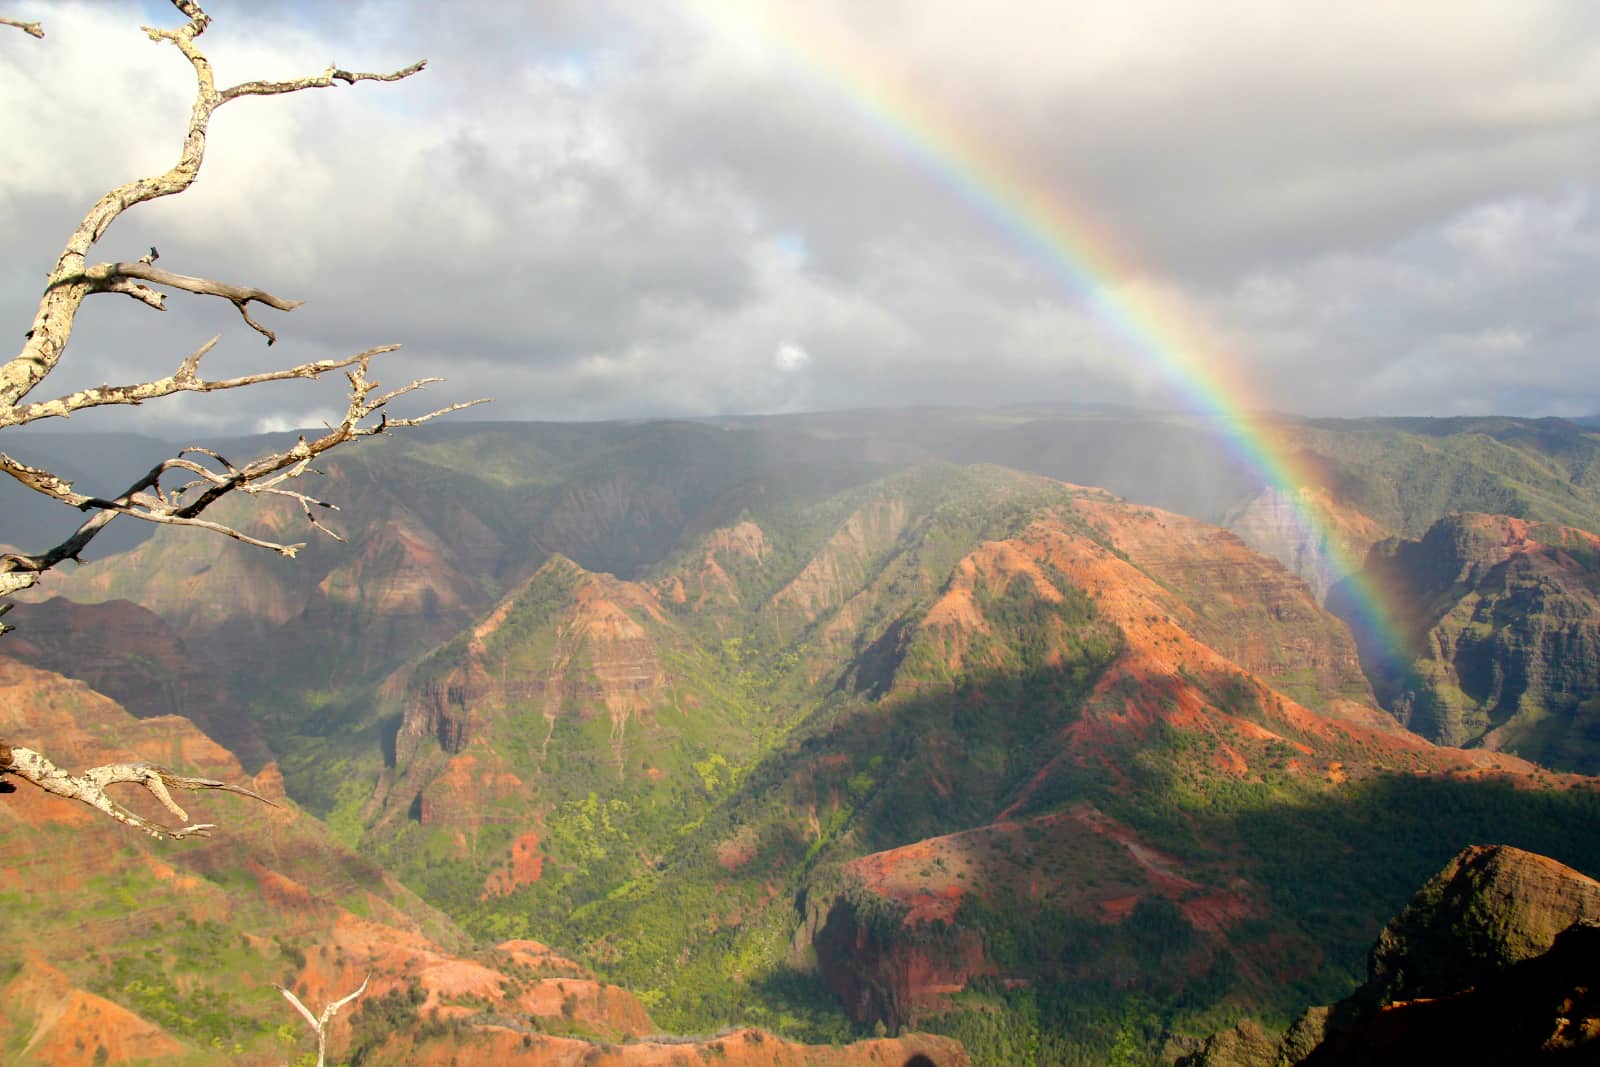 Leaf less tree in foreground with rainbow and red coloured mountains in background